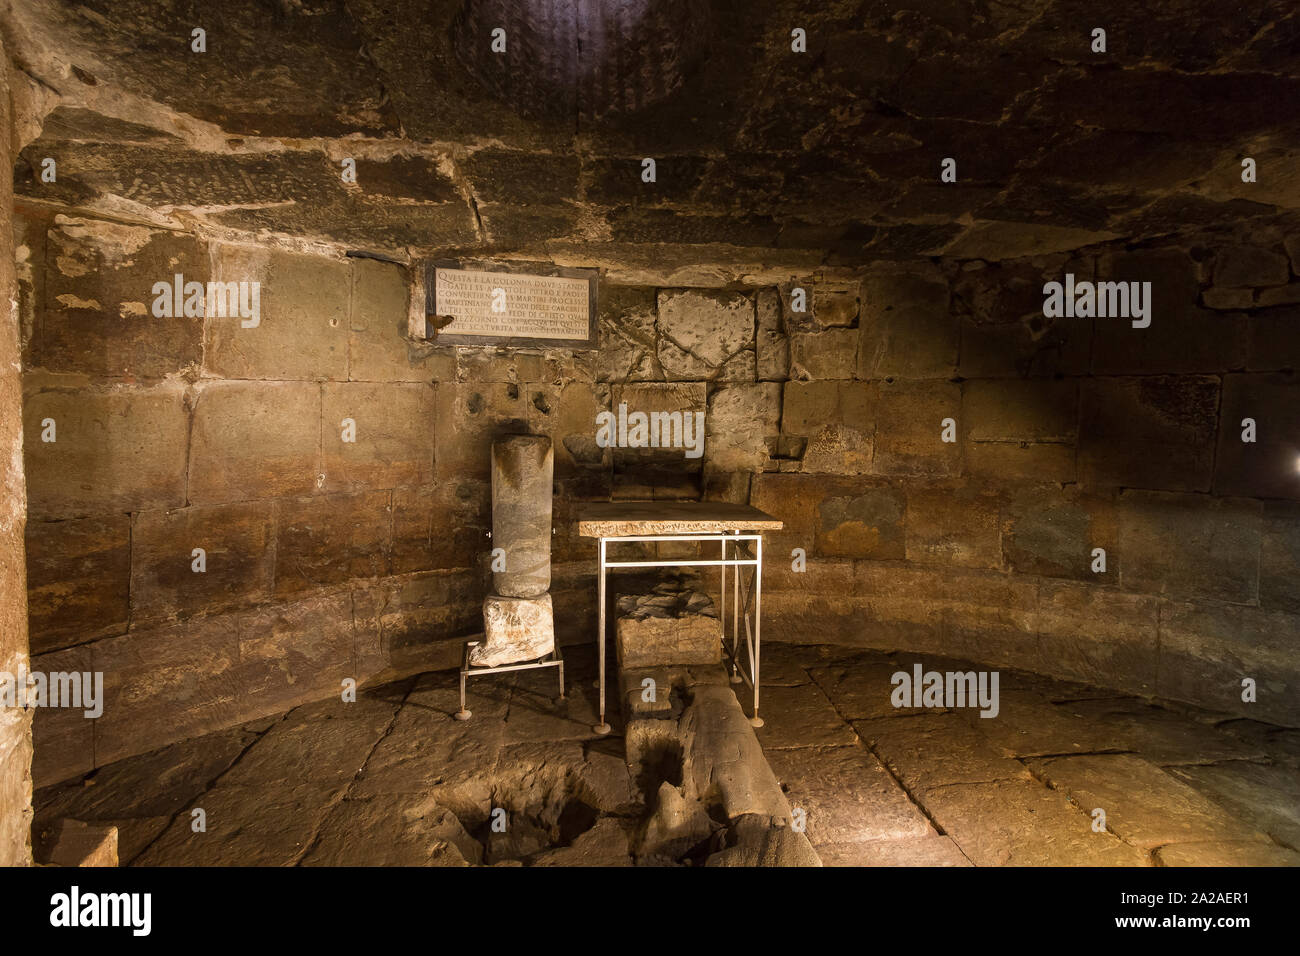 Image of the Mamertine prison in Rome, Italy. According to tradiotion Saint Paul was imprisoned in this jail. Stock Photo